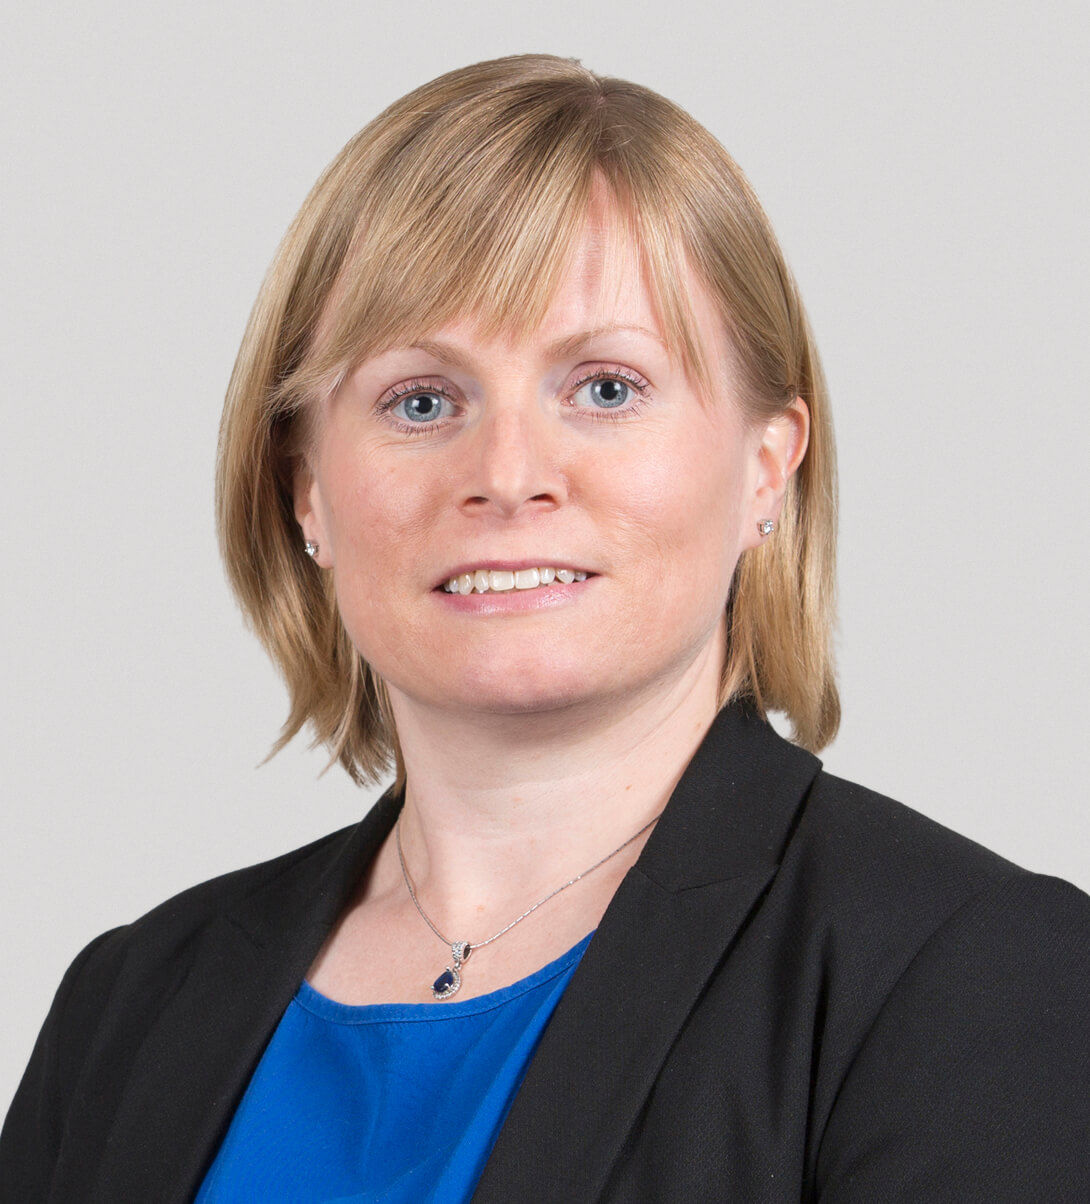 Personal Injury Lawyer of The Month: Emma Hall